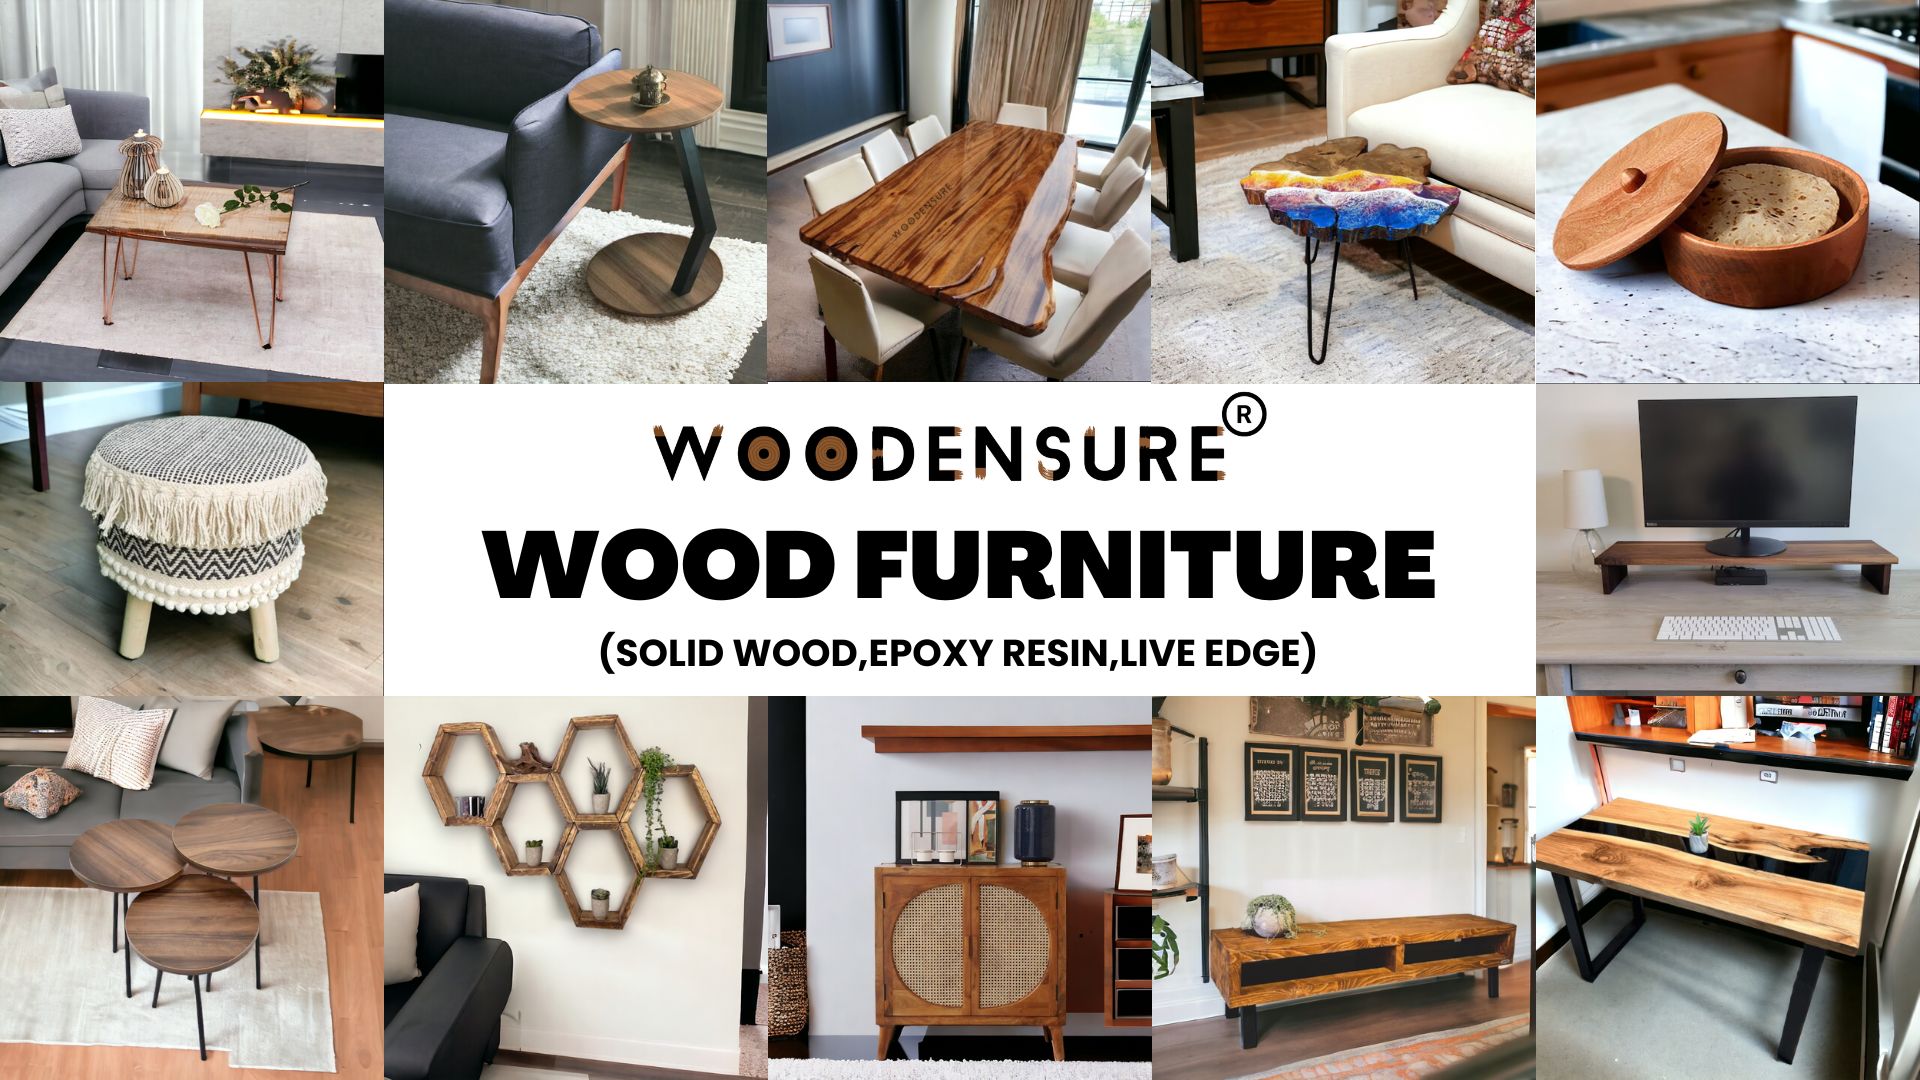 Wooden Furniture Online: Your Guide to Finding the...